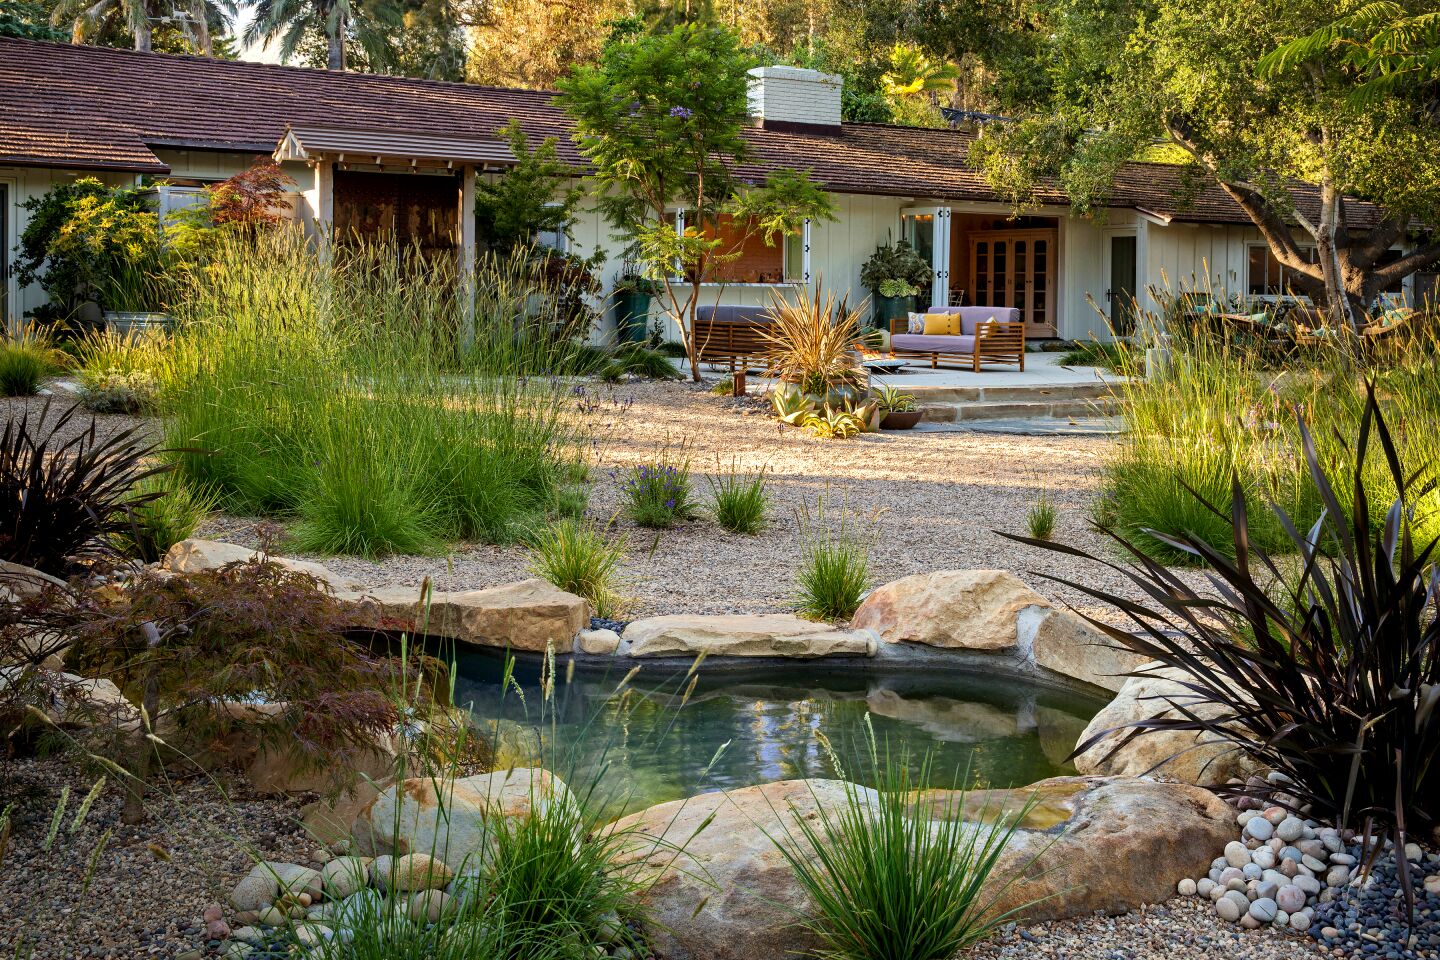 Landscape designer Margie Grace takes her cues from the Earth itself.